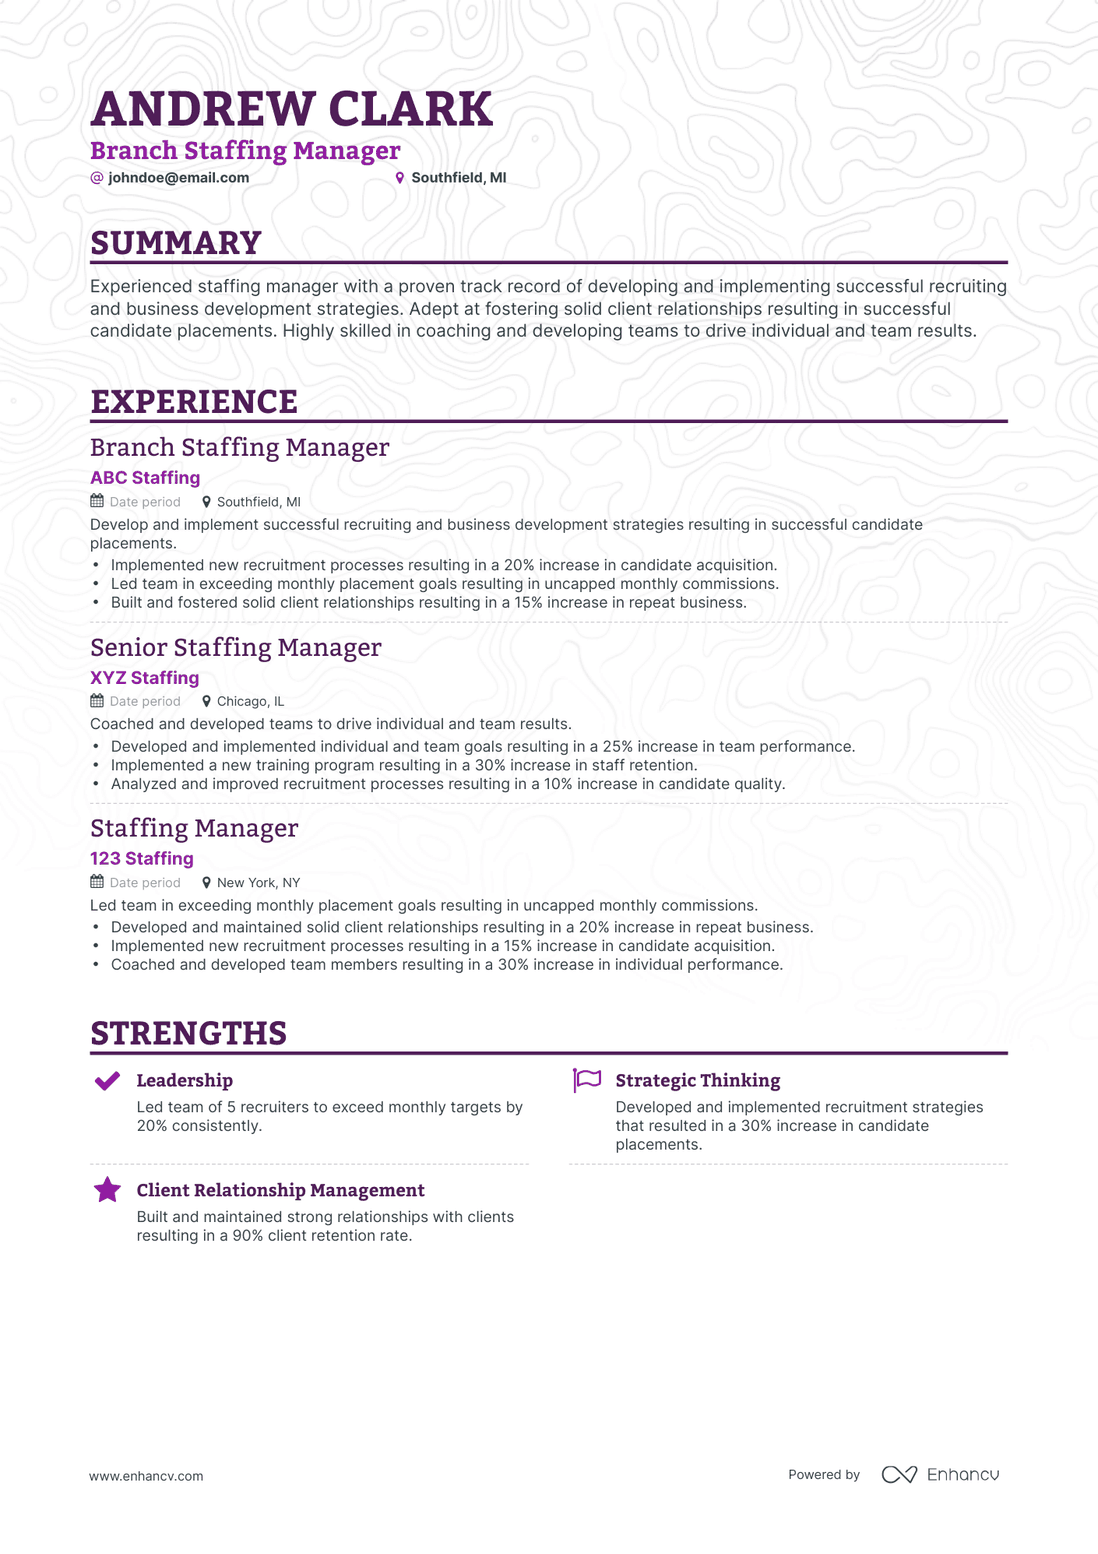 Classic Staffing Manager Resume Template